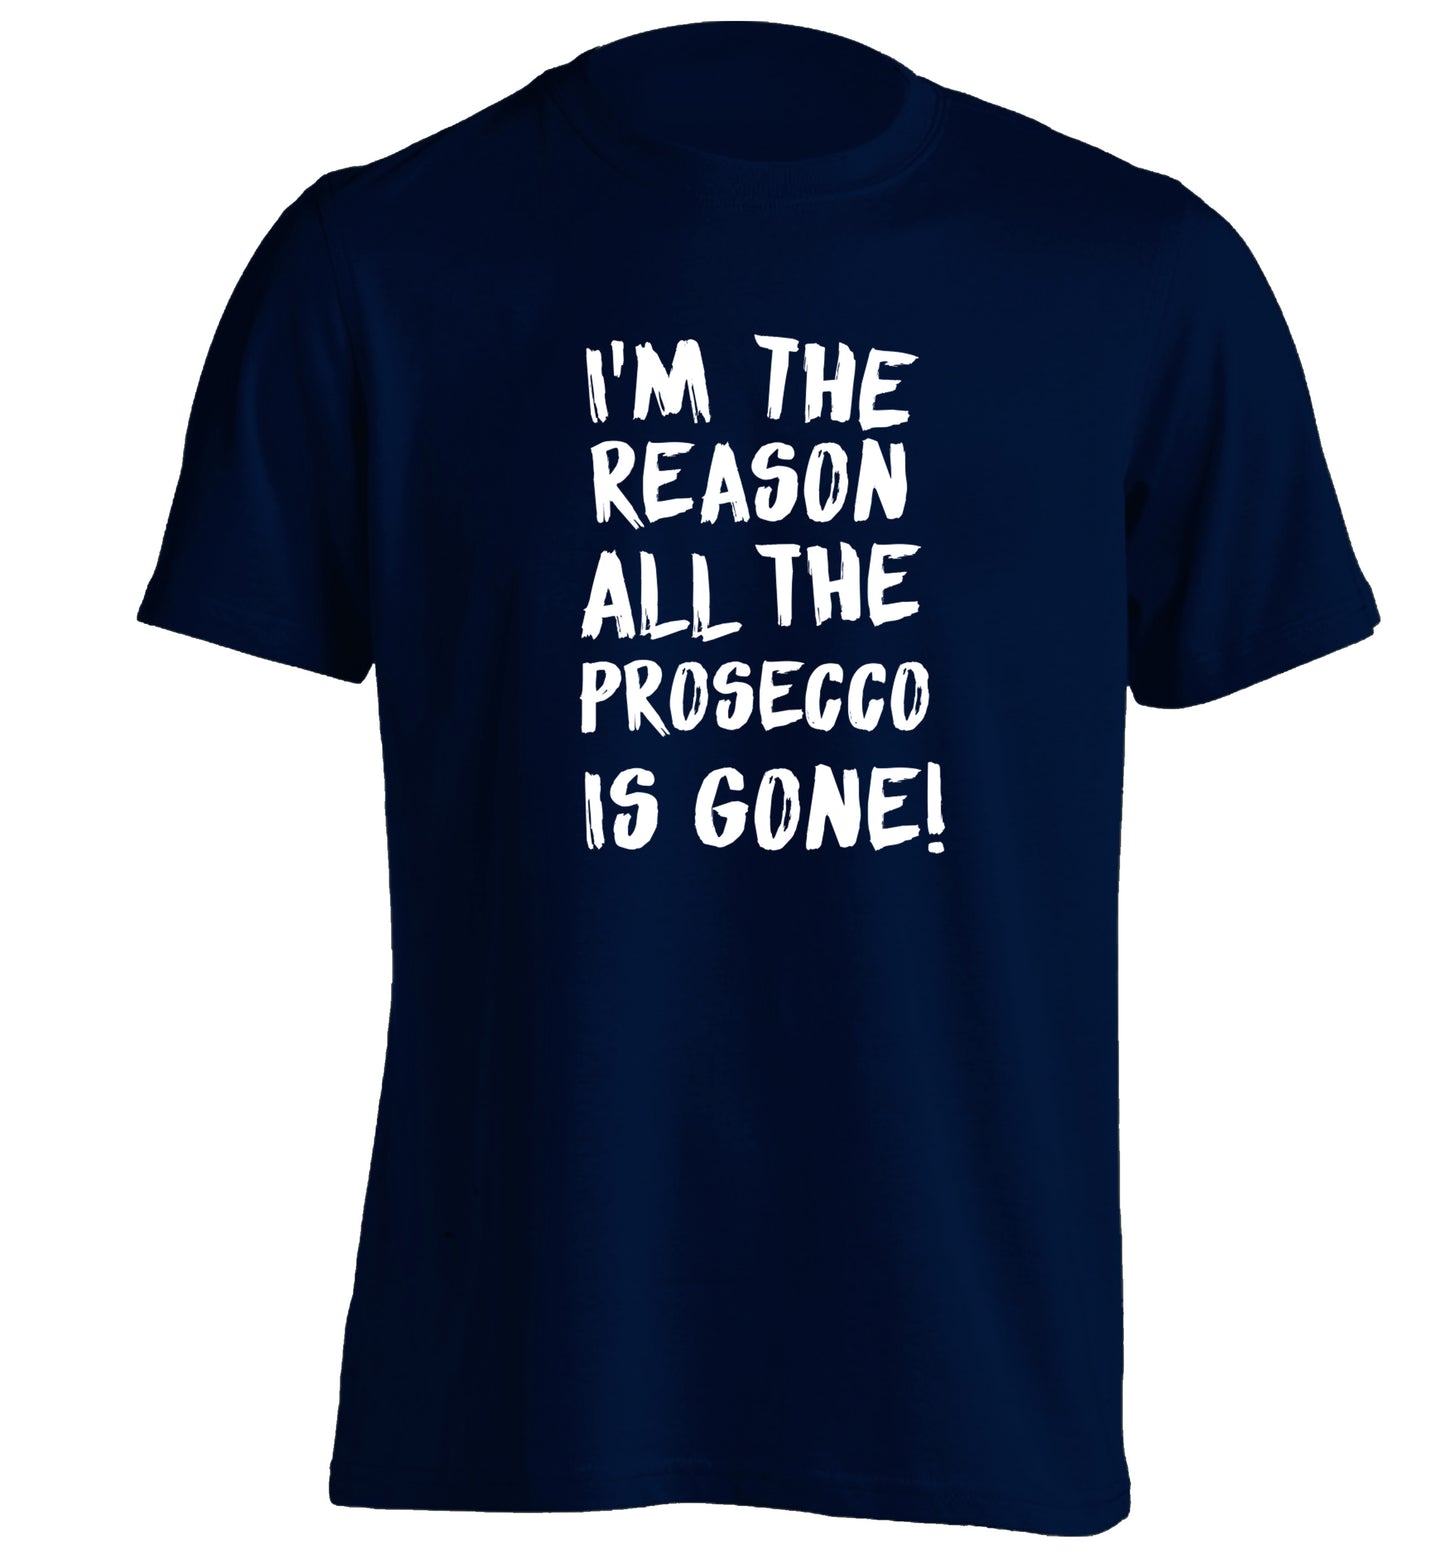 I'm the reason all the prosecco is gone adults unisex navy Tshirt 2XL